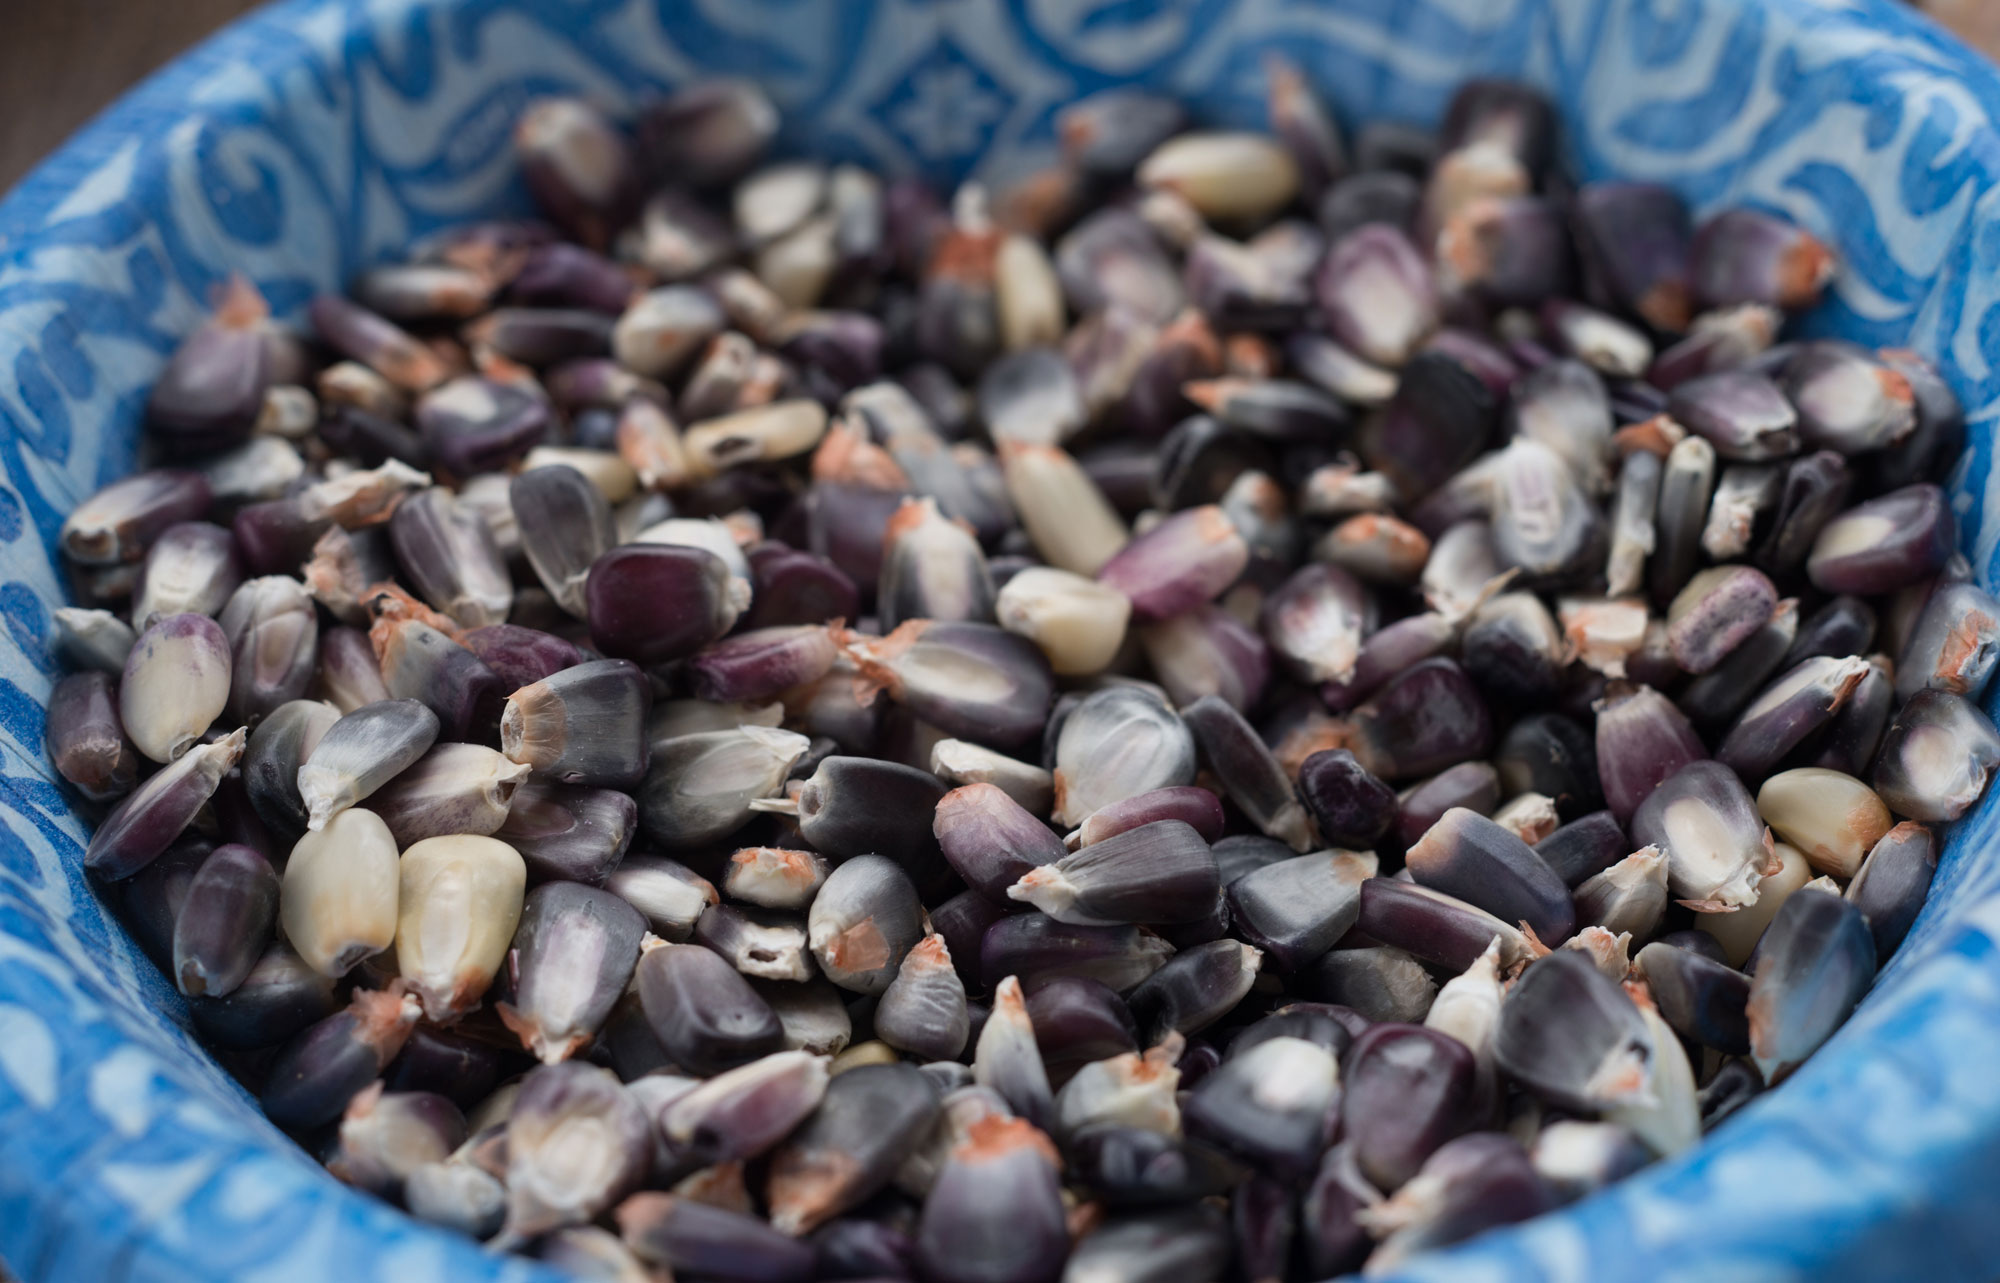 Photograph of Cherokee White Eagle maize kernels. The photo shows maize kernels in a blue-patterned bowl. The kernels are purple and white in color.